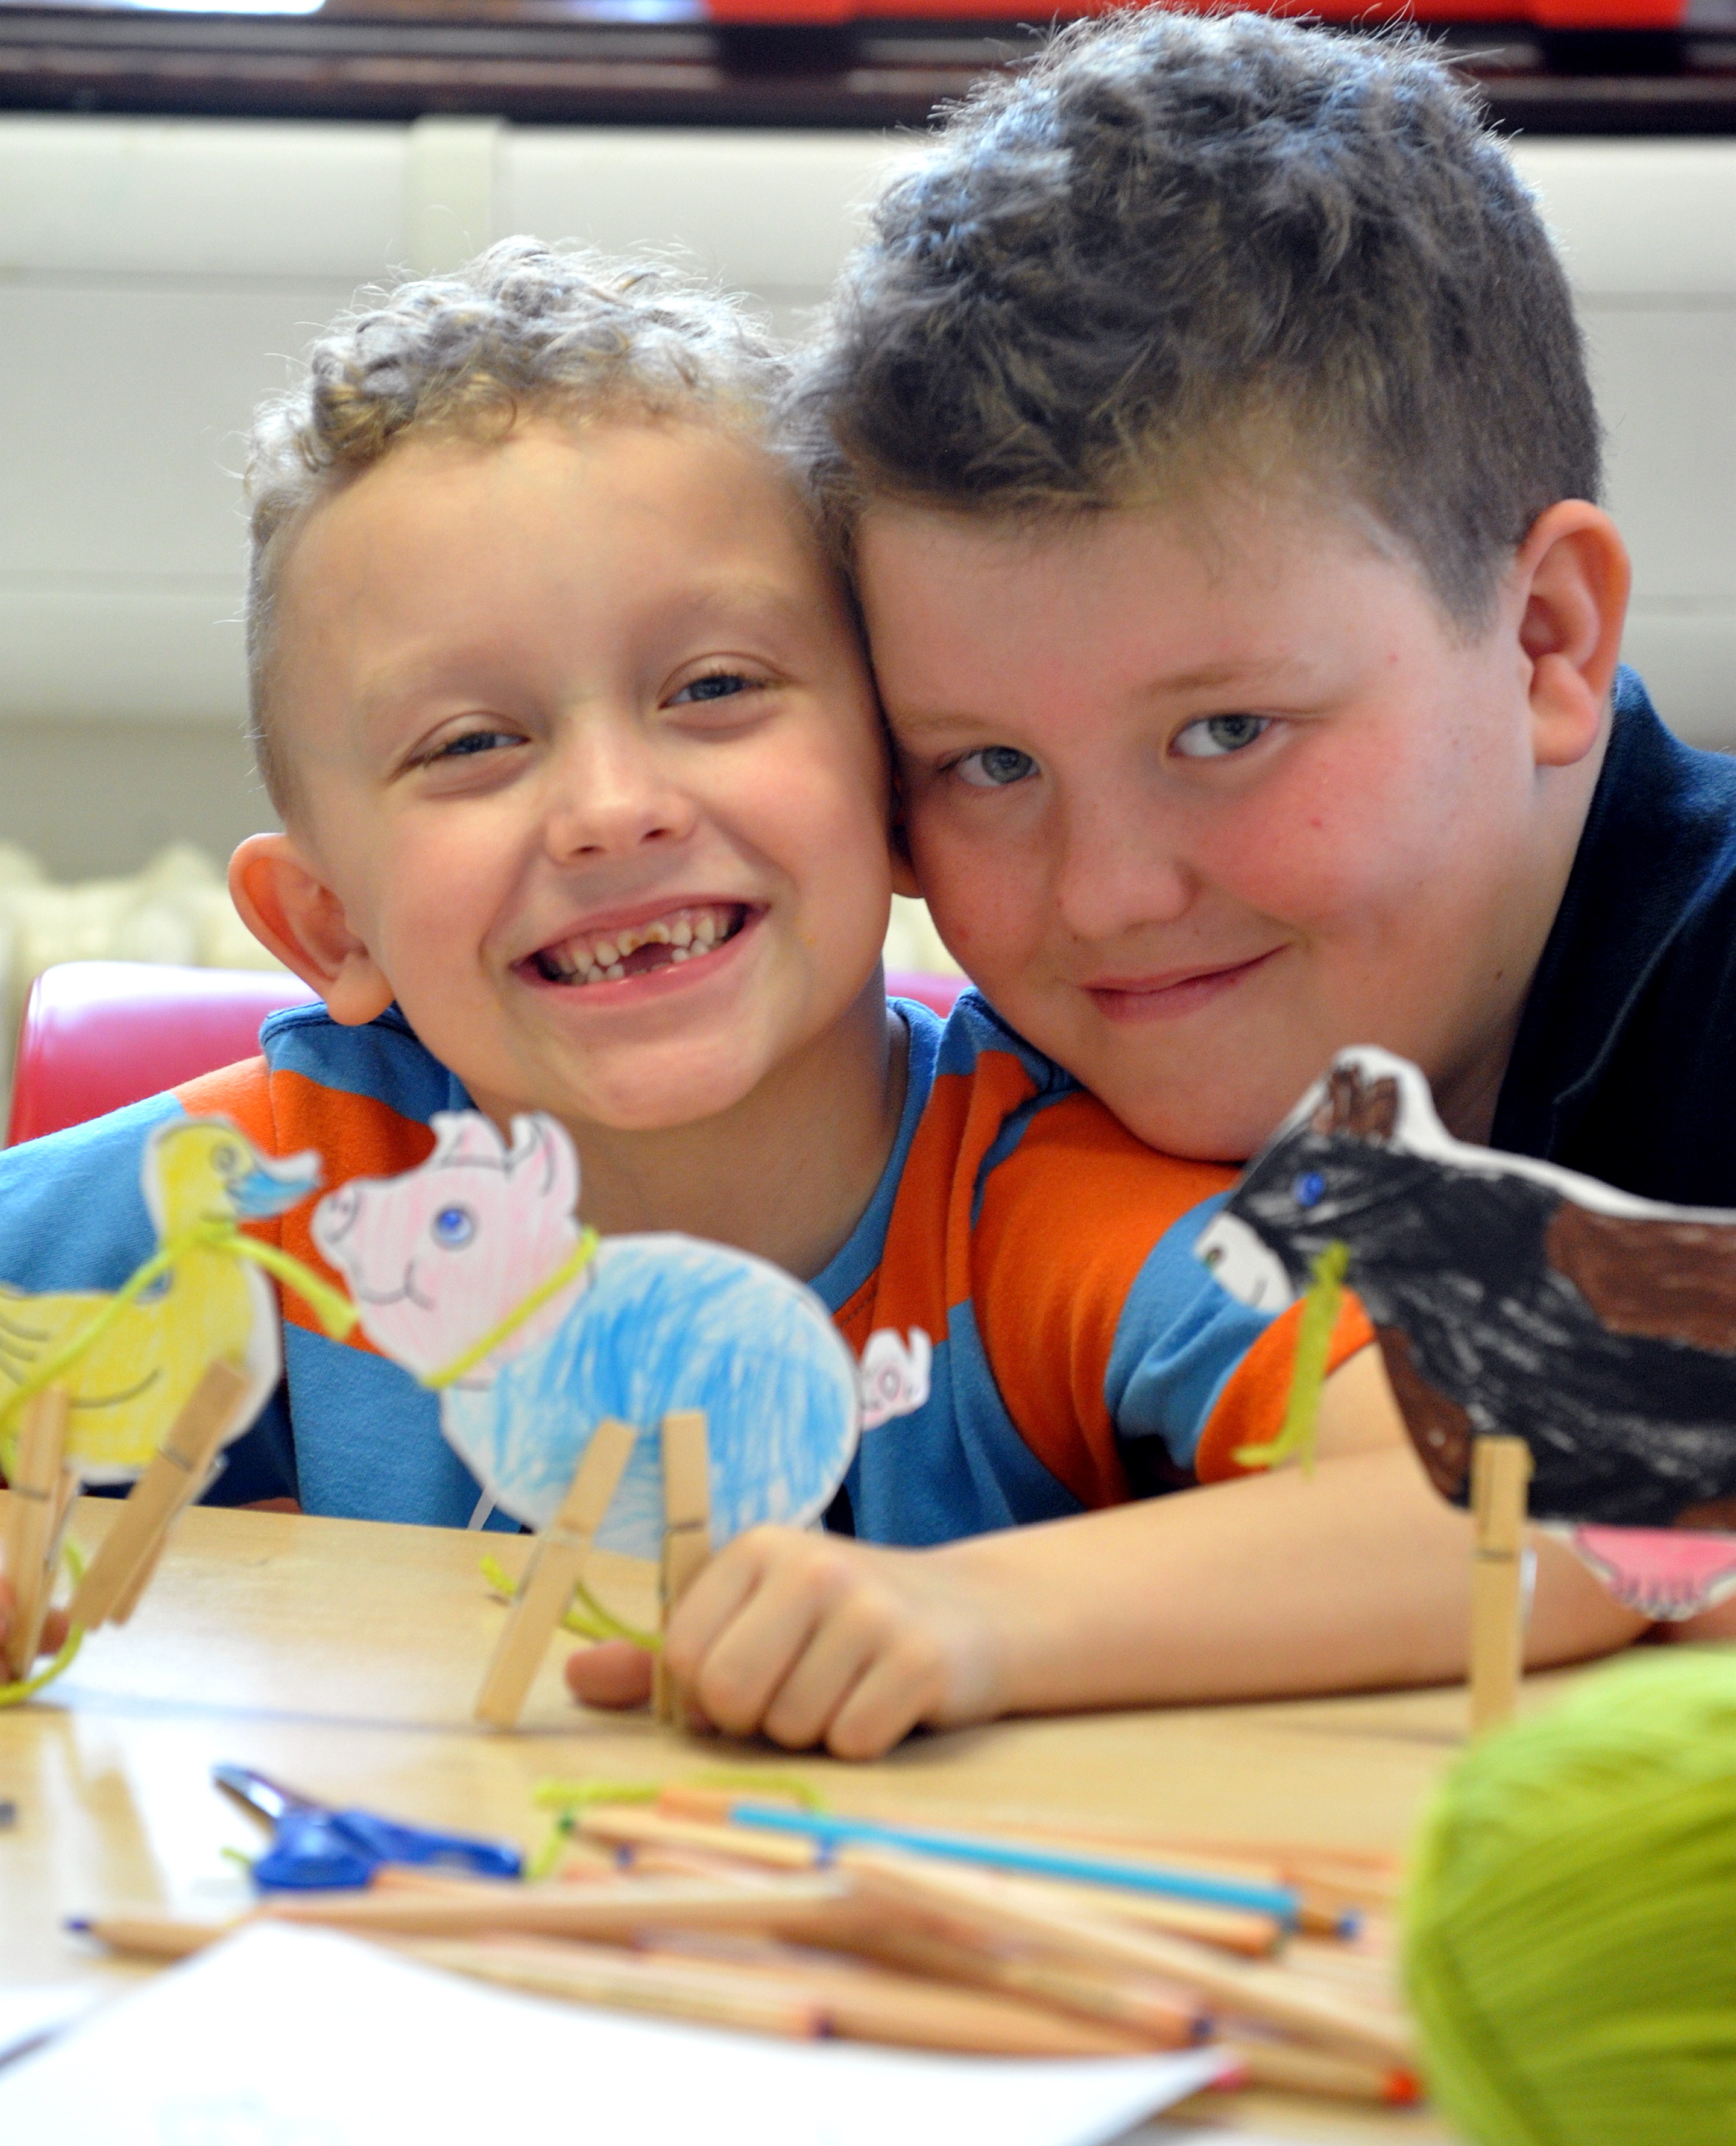 Crafty youngsters &#39;not horsing around&#39; at Bolton Central Library (From The Bolton News) - 3669802